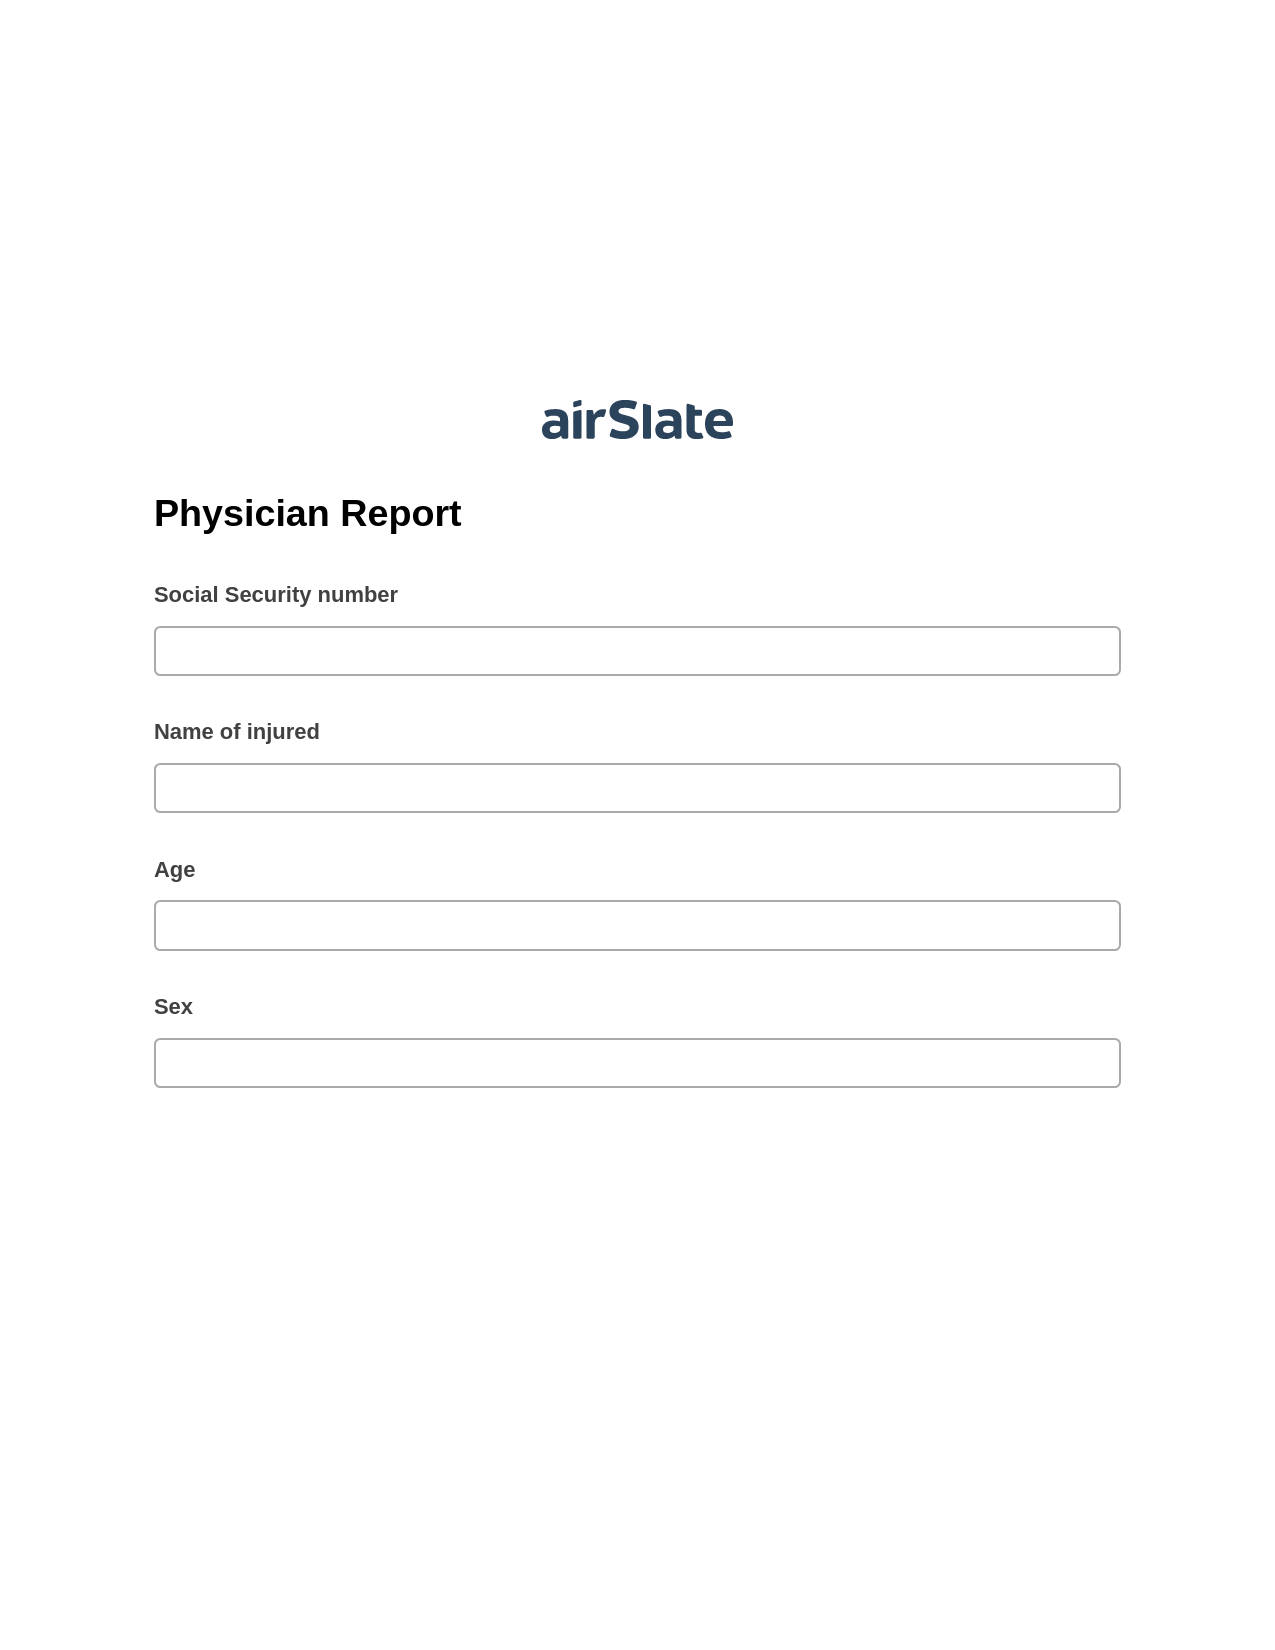 Multirole Physician Report Pre-fill from CSV File Bot, Create NetSuite Record bot, Export to Excel 365 Bot